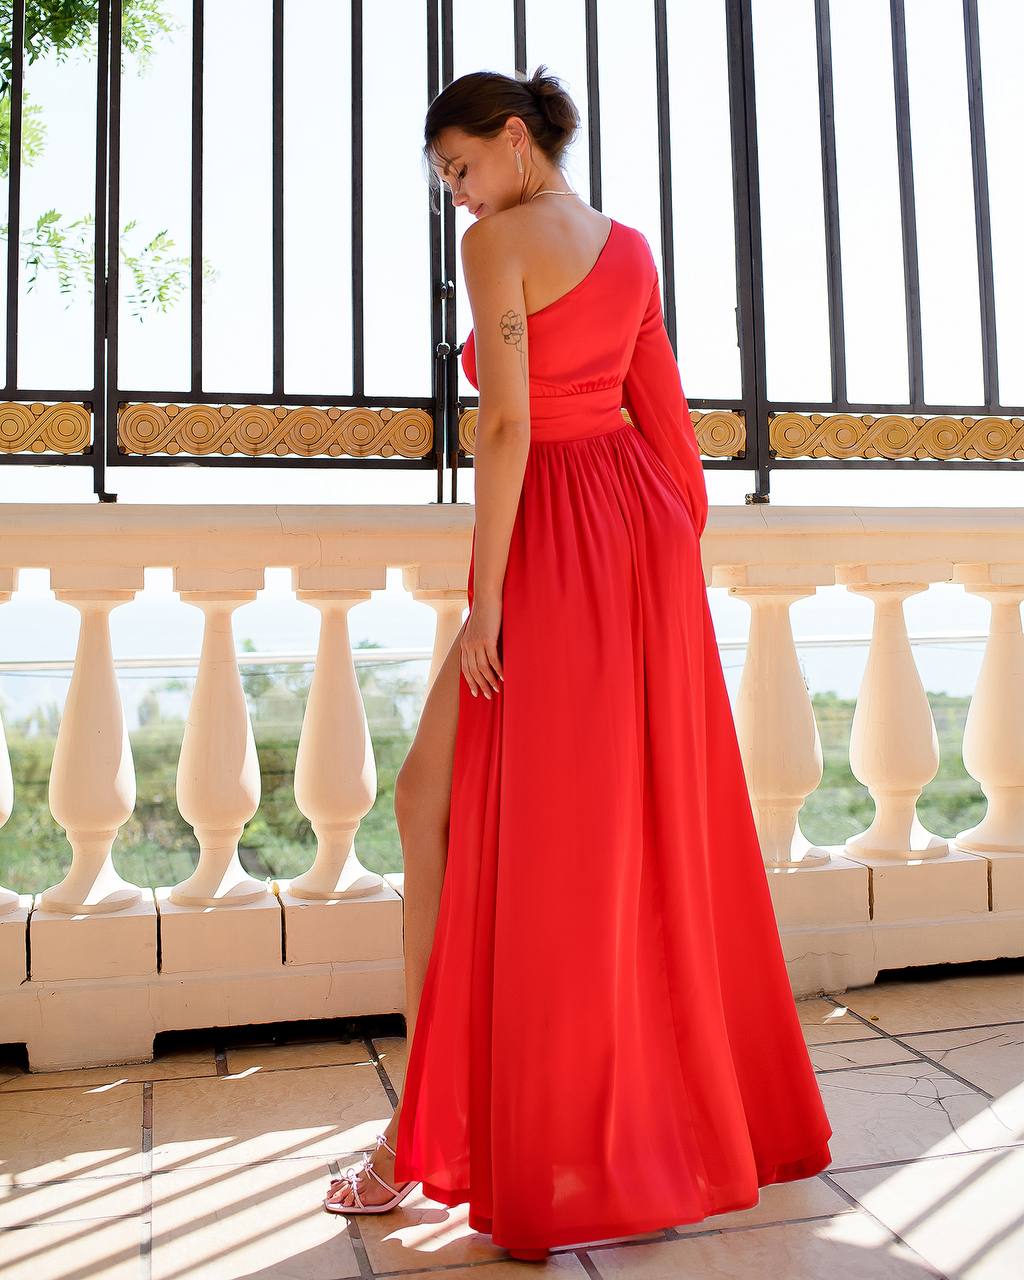 a woman in a long red dress standing on a balcony